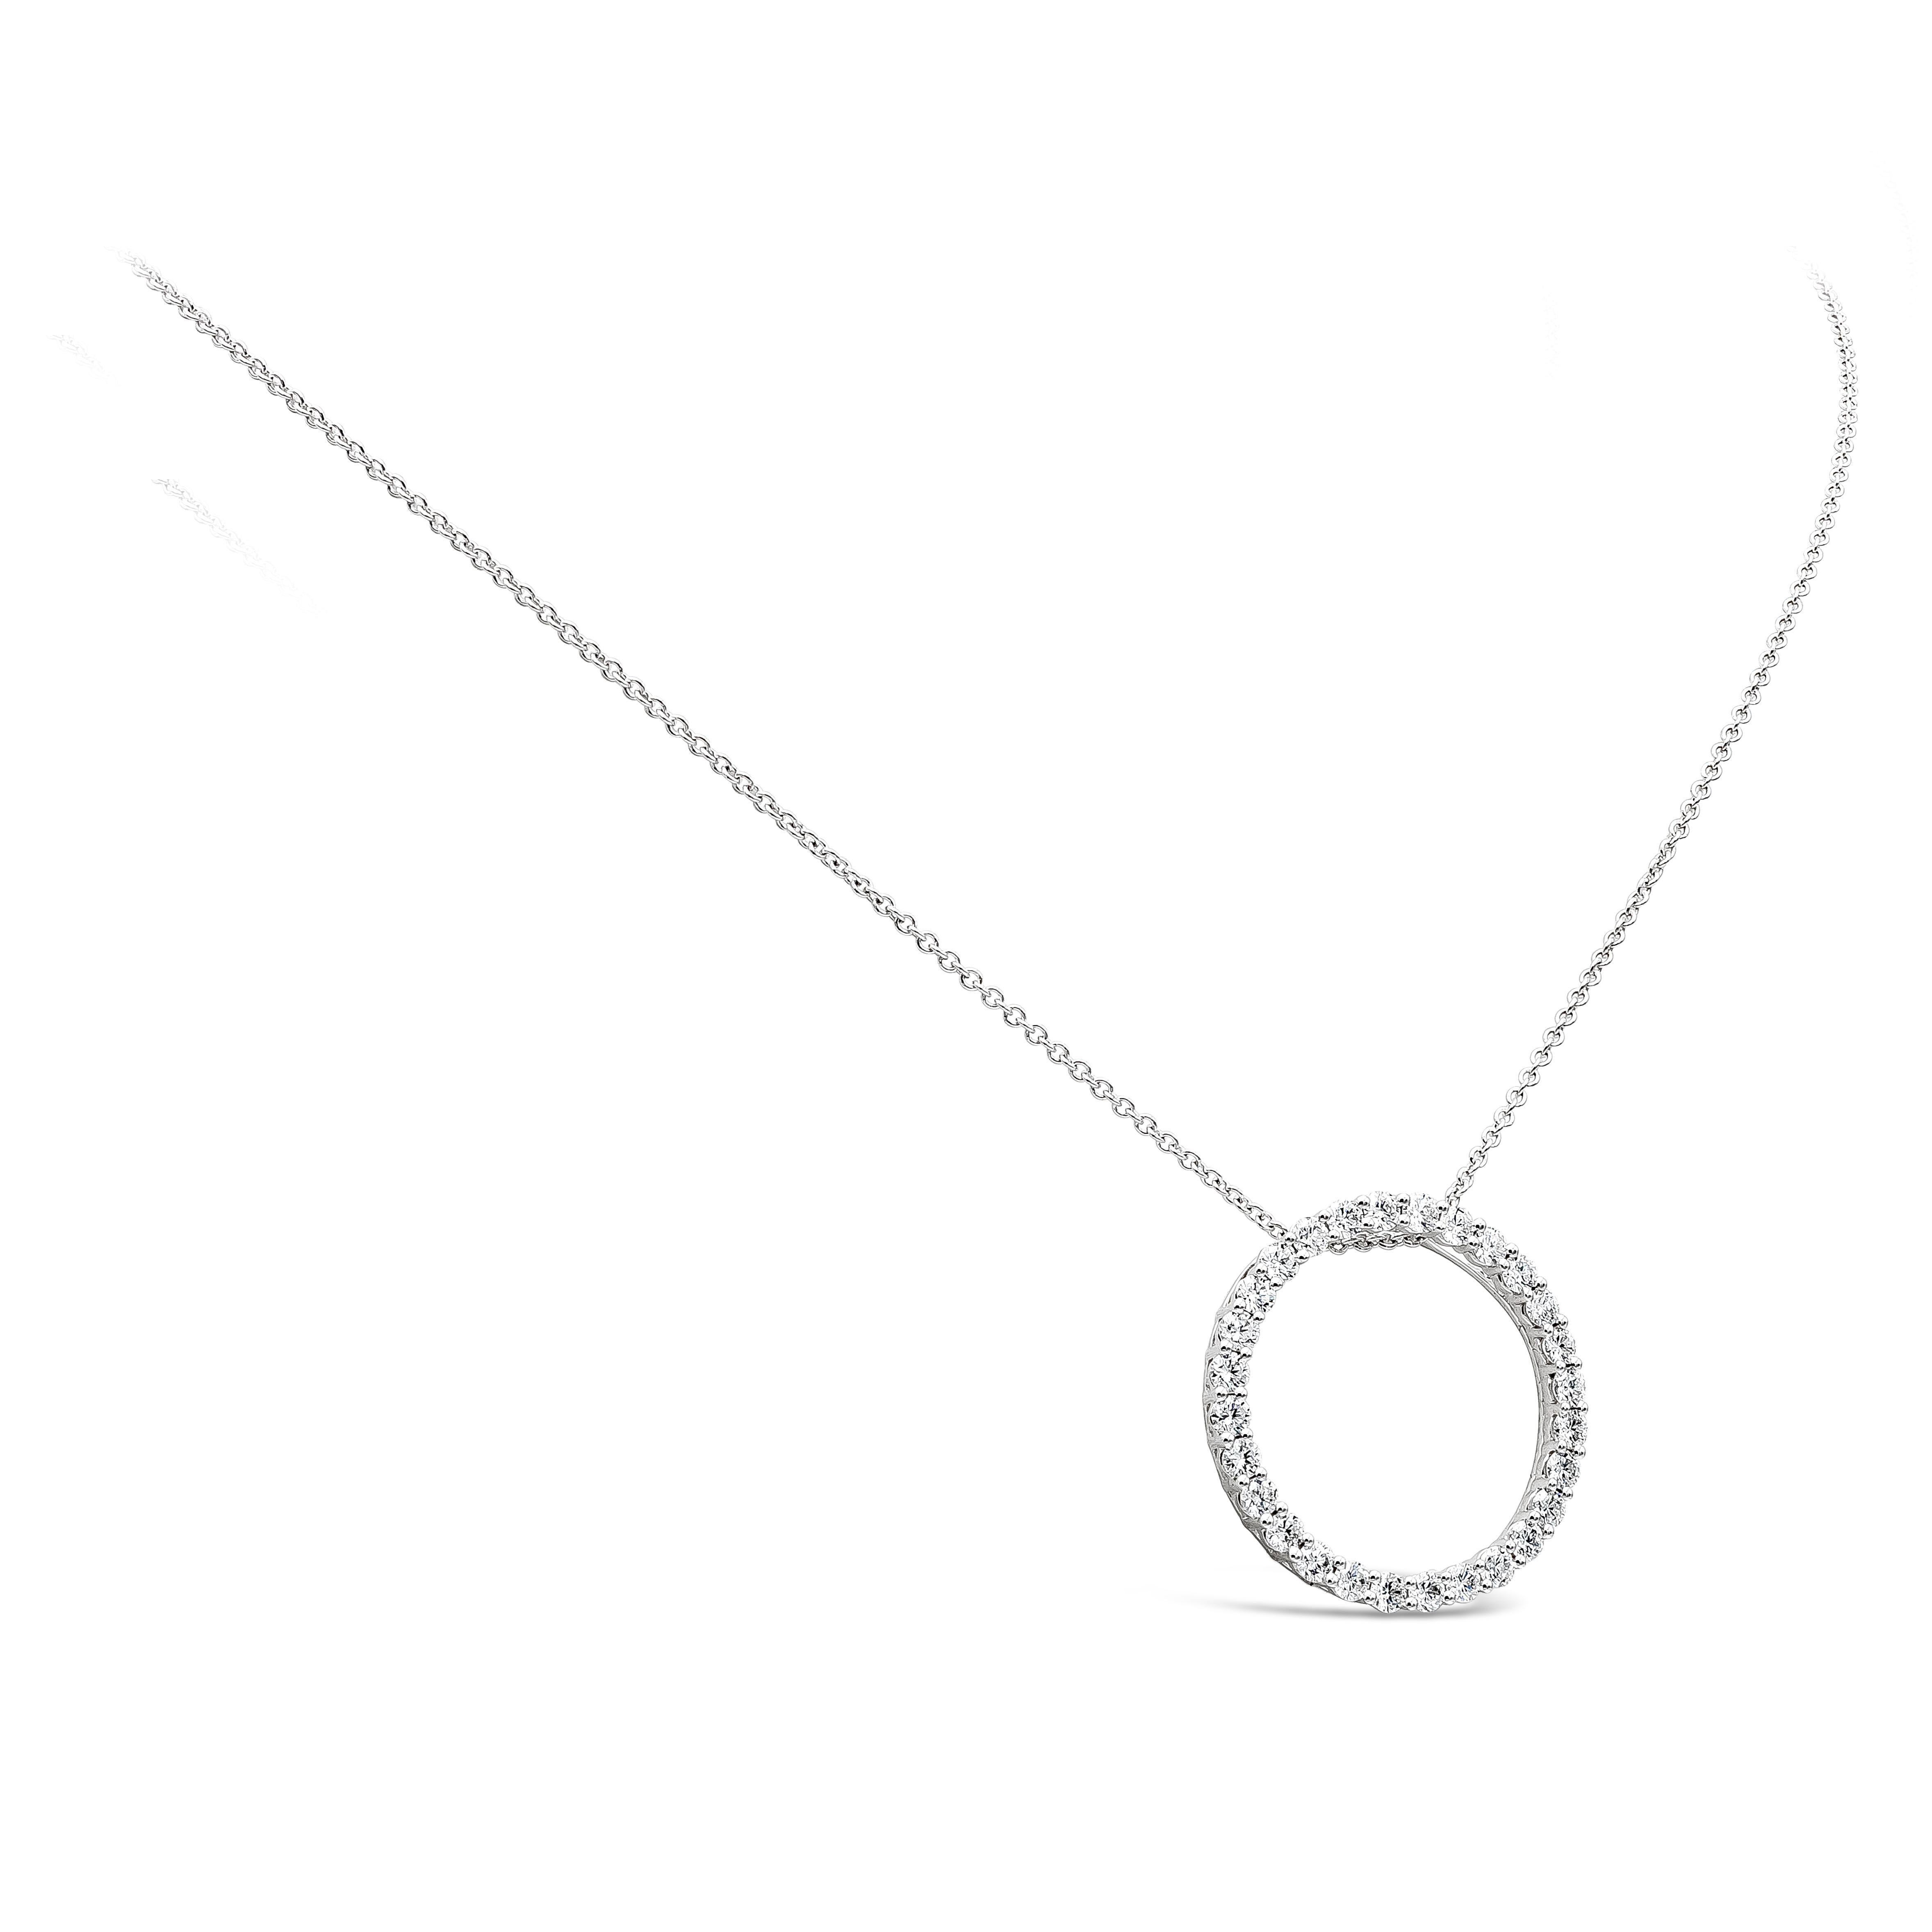 A stylish pendant necklace showcasing a row of round brilliant cut diamonds, set in an open-work, circular design. Diamonds weigh 1.40 carats total, F-G Color and VS-SI in Clarity. Made with 18K White Gold. 16 inches in Length.

Roman Malakov is a